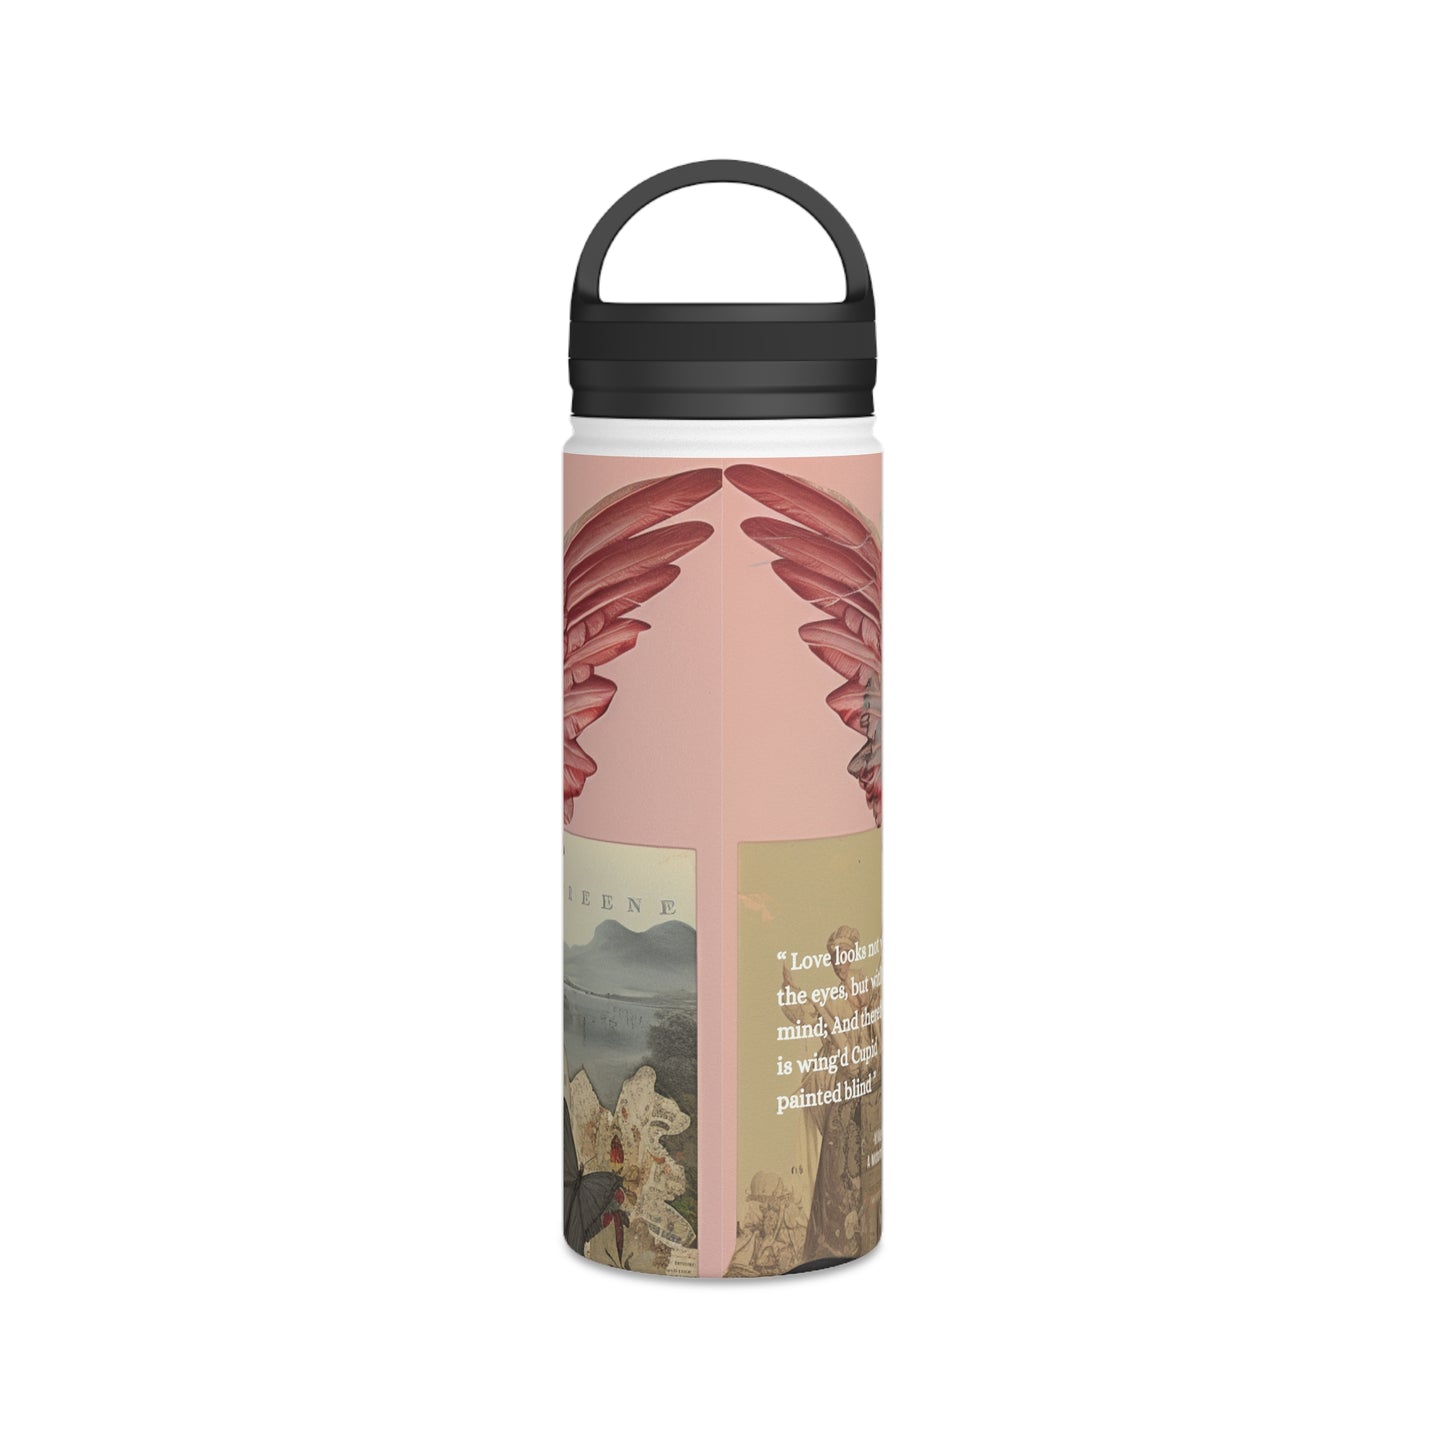 William Shakespeare Inspired Stainless Steel Water Bottle | For Book Lovers & Adventure Seekers